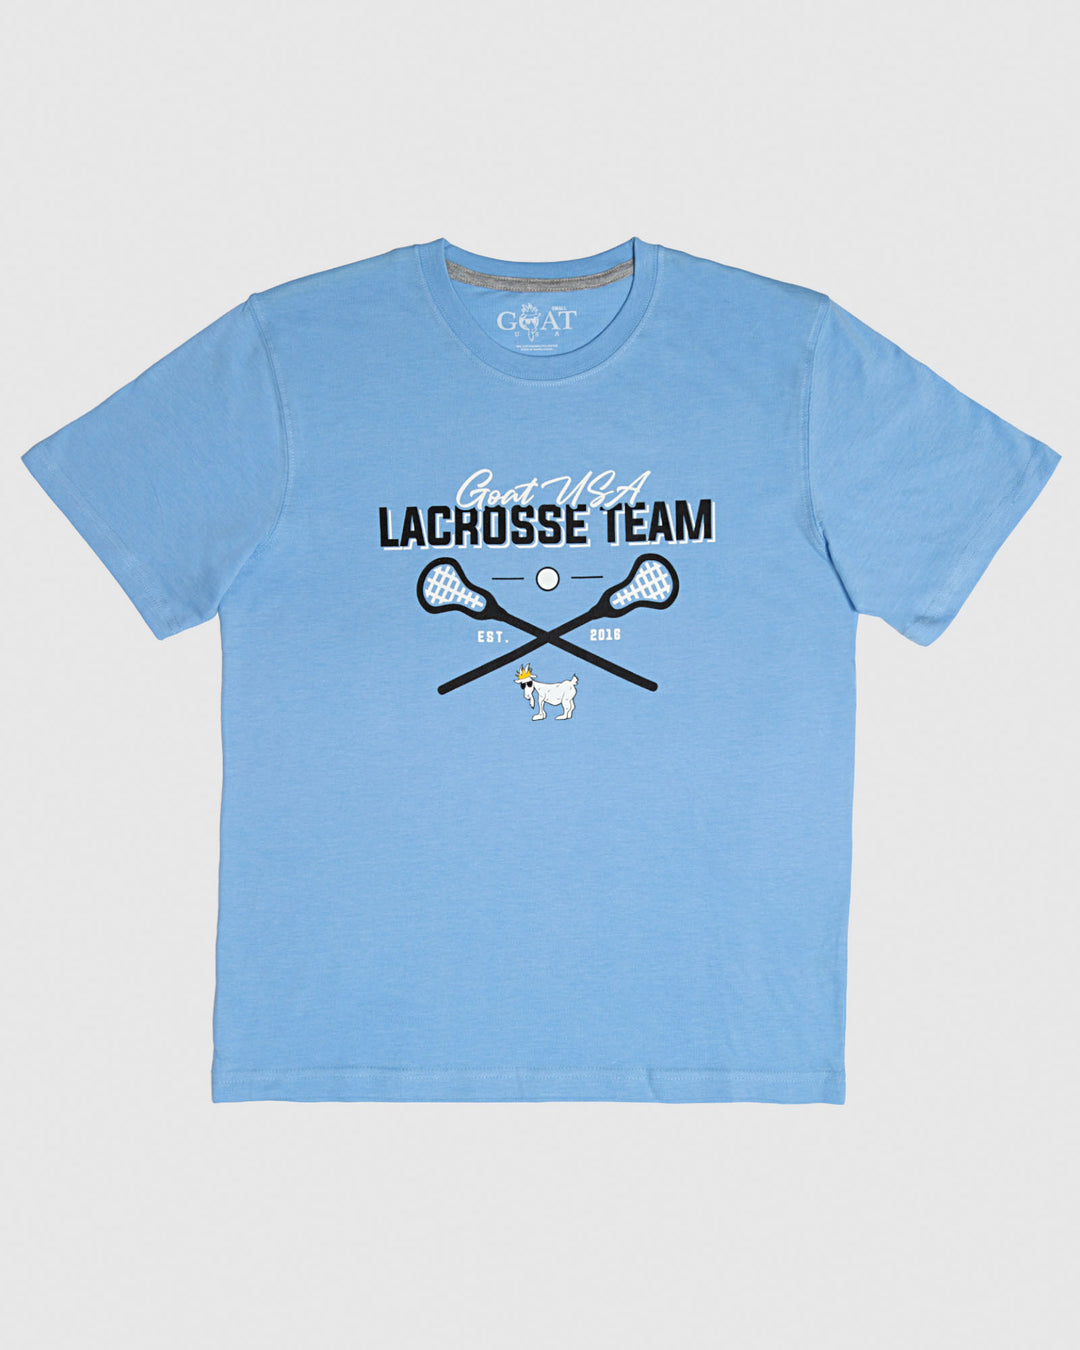 Carolina blue shirt that reads "GOAT USA LACROSSE TEAM" with lacrosse graphic